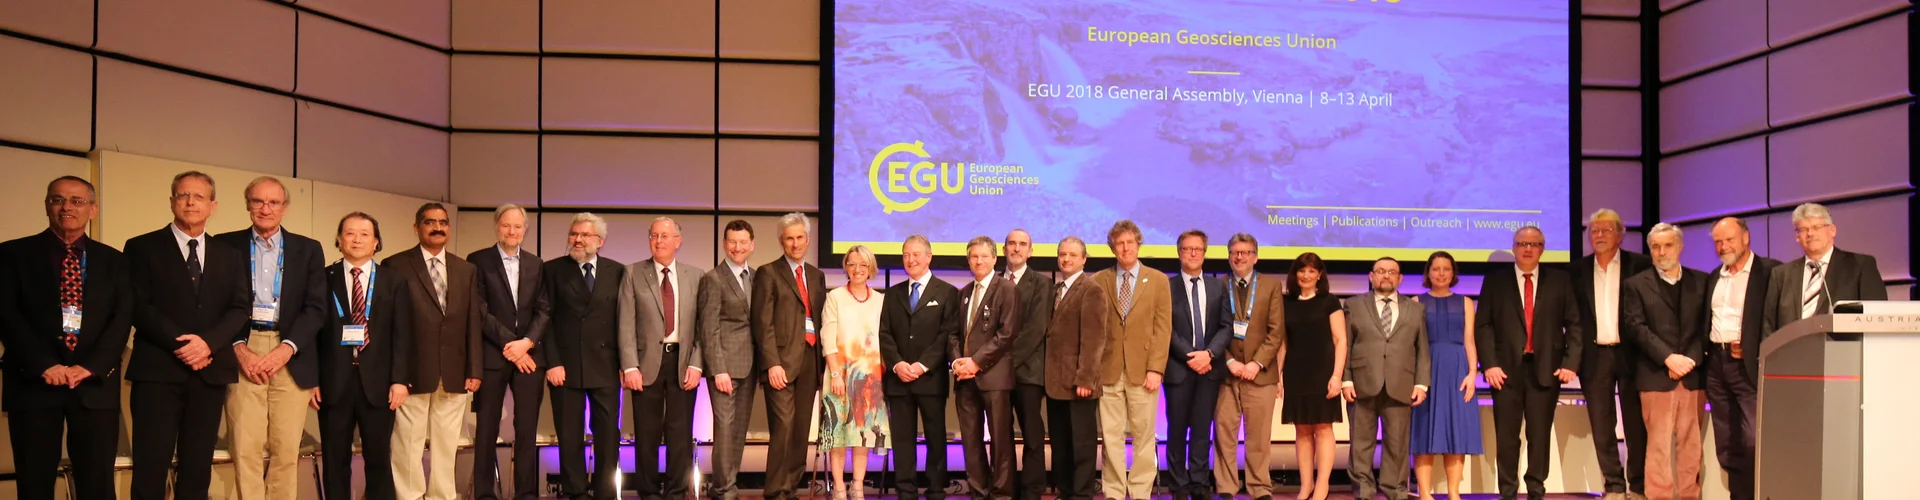 Some of last year's awardees with the EGU President and Vice-President at the EGU 2018 Awards Ceremony (Credit: EGU/Foto Pfluegl)